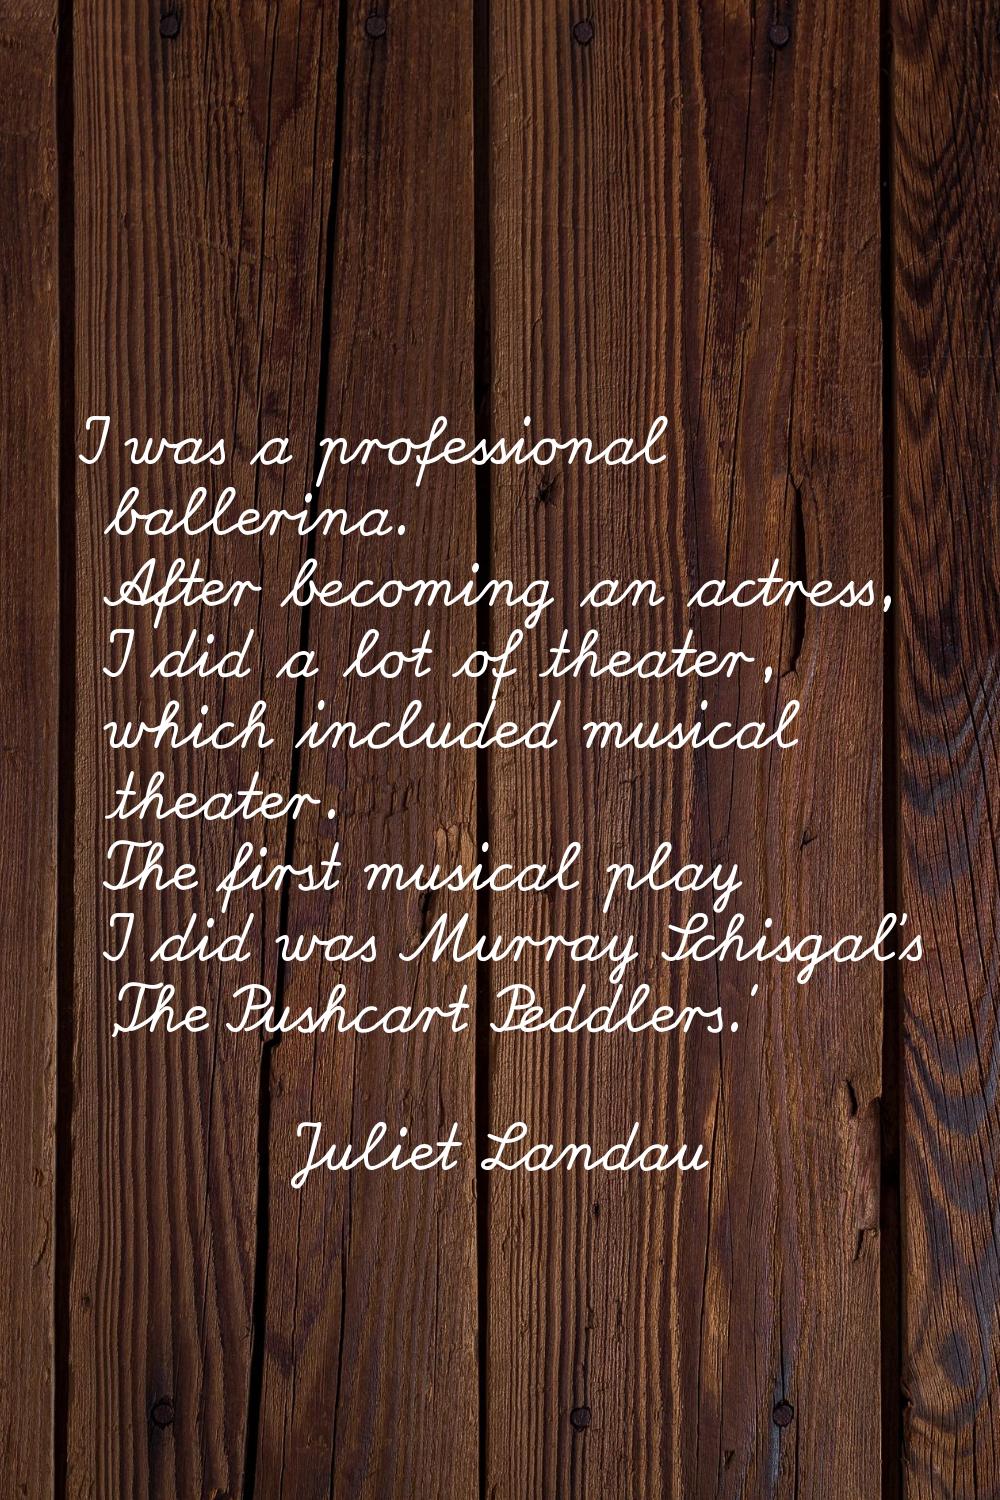 I was a professional ballerina. After becoming an actress, I did a lot of theater, which included m